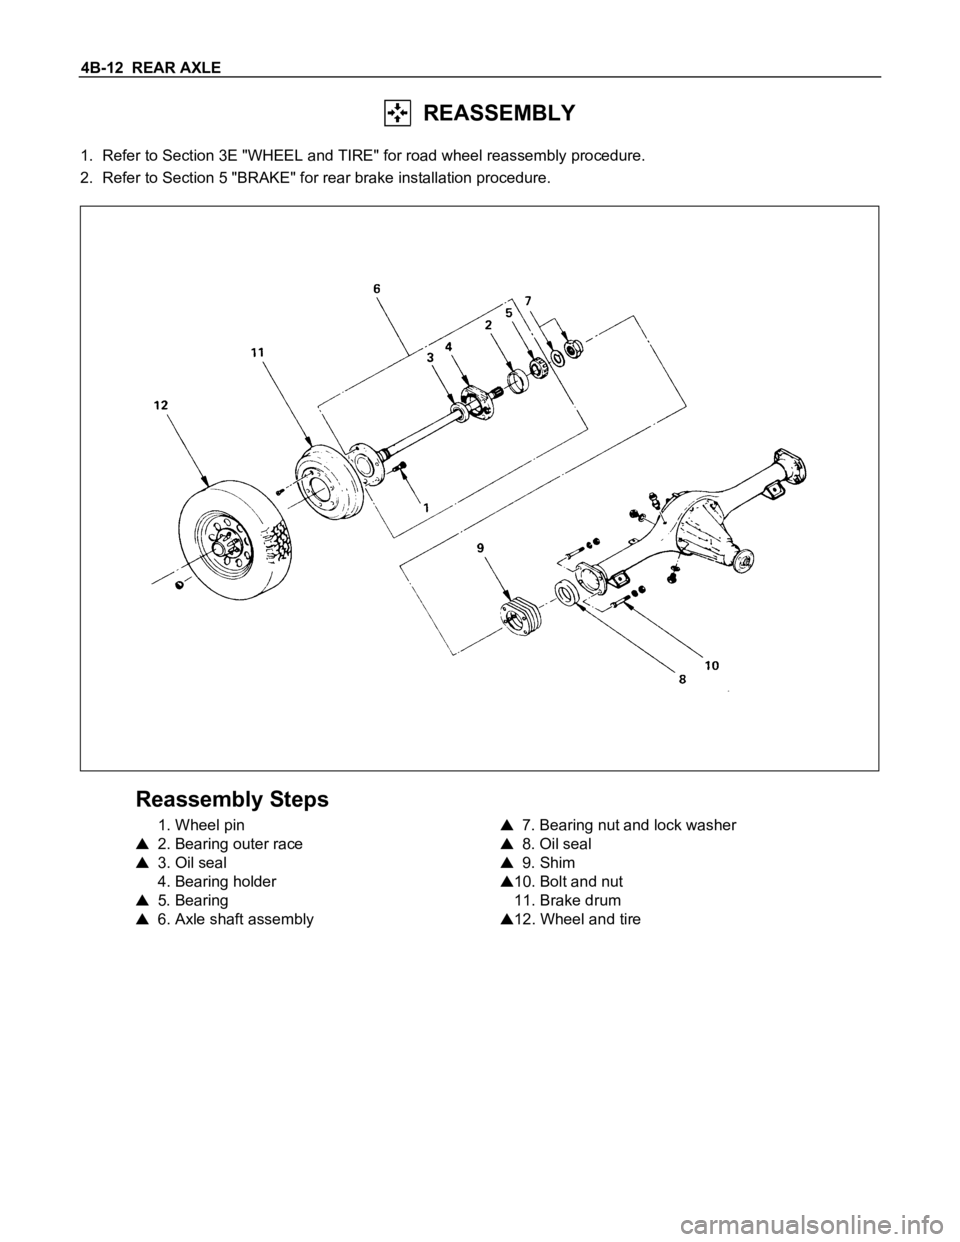 ISUZU TFS SERIES 1997  Workshop Manual 4B-12  REAR AXLE
  REASSEMBLY
1. Refer to Section 3E "WHEEL and TIRE" for road wheel reassembly procedure.
2. Refer to Section 5 "BRAKE" for rear brake installation procedure.
Reassemb